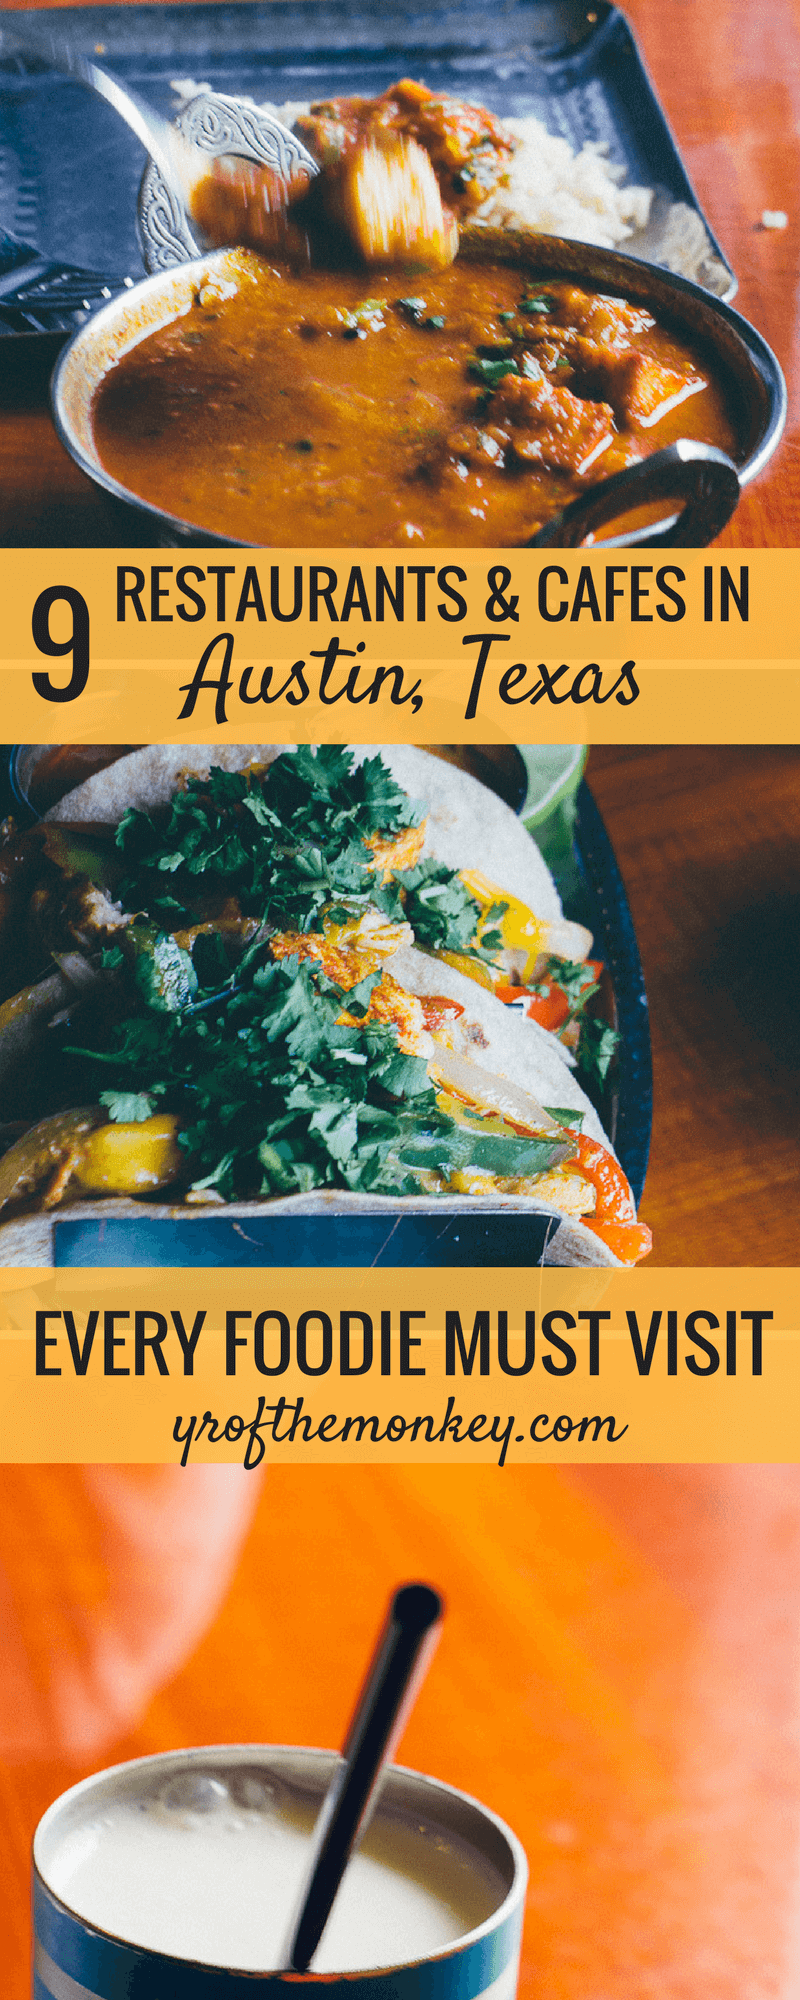 This is an alternate Austin Texas USA dining guide which goes beyond the barbecue and showcases 9 diverse and best restaurants in Austin. This Austin food guide includes vegetarian and ethnic options and tells you where to eat in Austin for breakfast, lunch and dinner. Don't miss reading this culinary Austin guide if you are a foodie. Pin it to your USA board for a lipsmacking food tour!